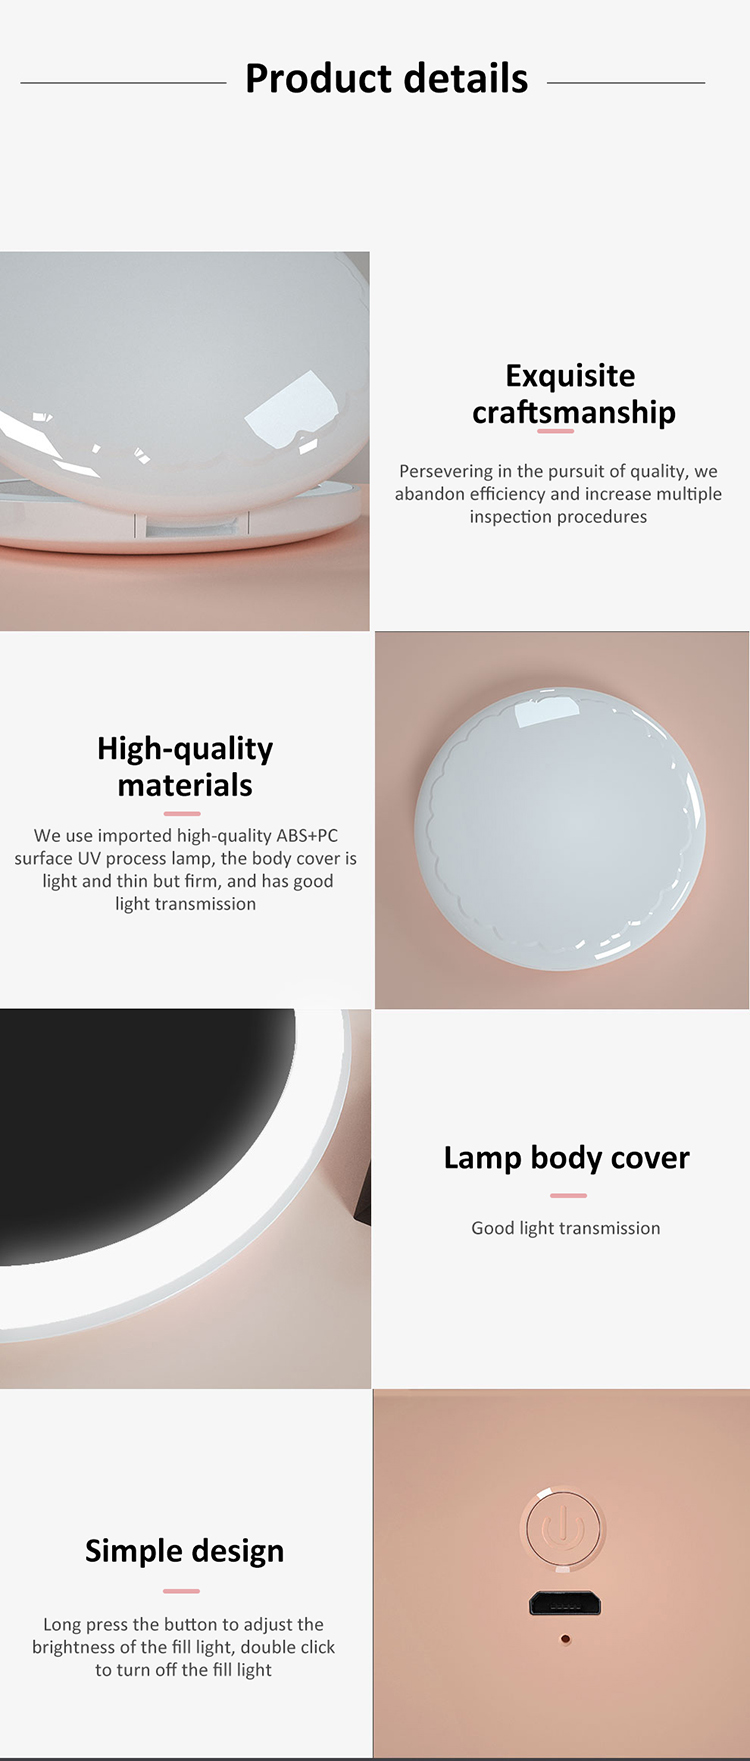 IFINE Beauty Newest OEM Touch Screen Makeup Mirror With LED Mini Folding Portable Vanity With Led Light Makeup Mirror